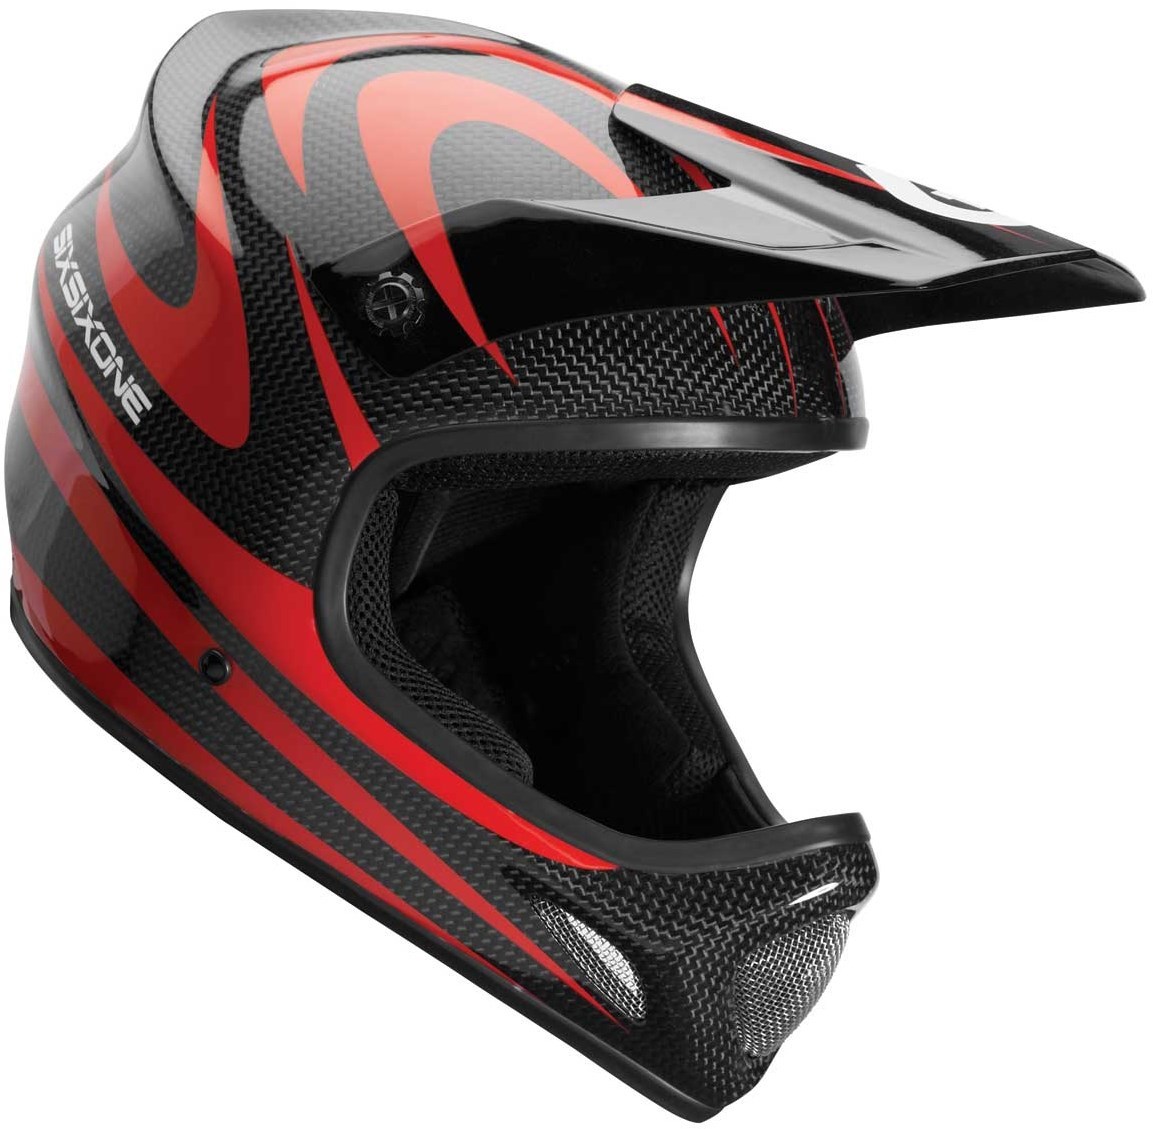 SixSixOne 661 Evo Carbon Camber Full Face Helmet product image